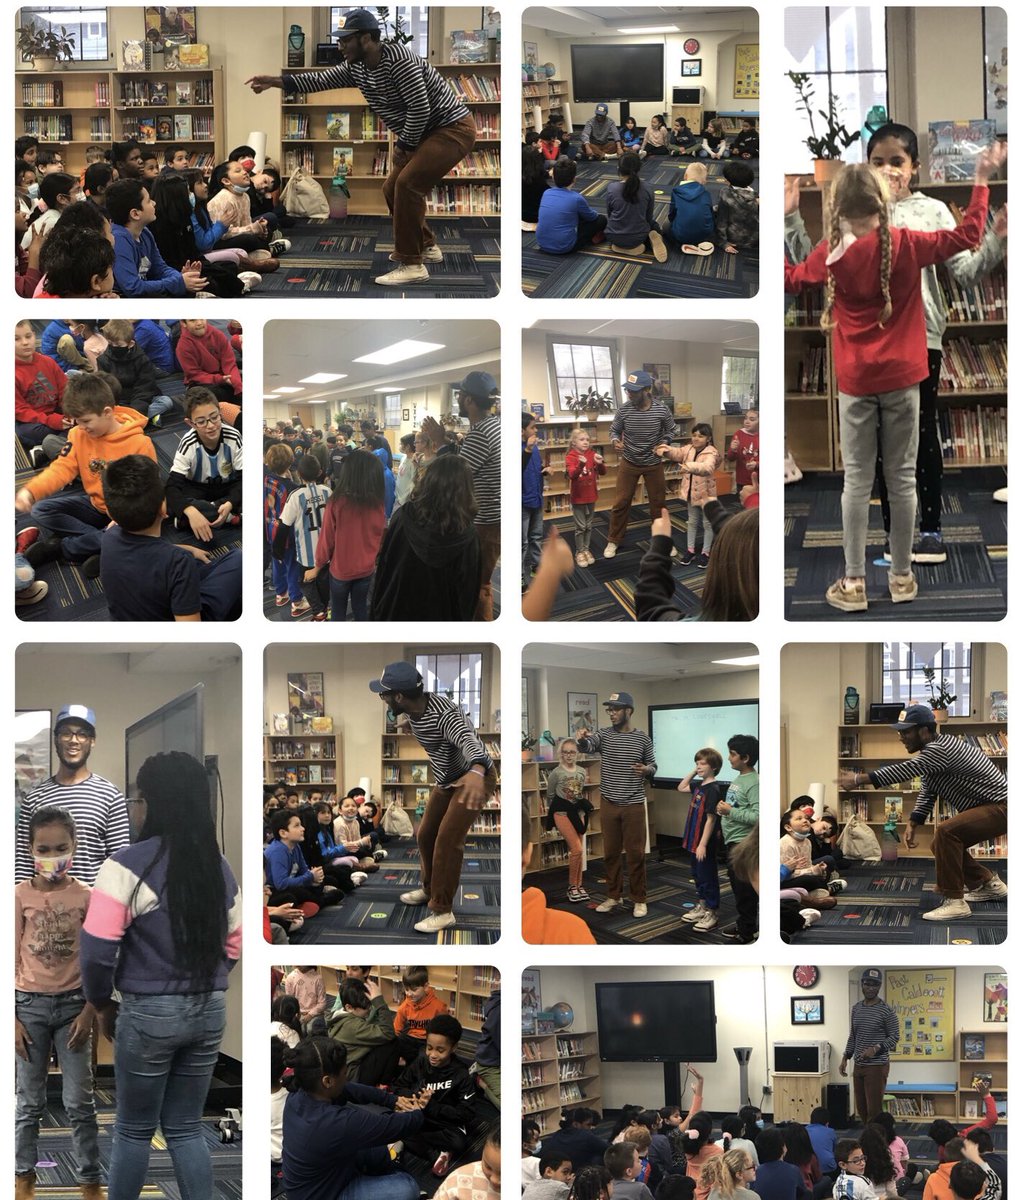 What a great day writing, rhyming, rapping & singing with @MalikLovesYall Our creative 3rd graders did a great job! Many thanks @LTEFNJ for supporting this project! Tomorrow he’ll head to @bfes_ltps Then it will be time for some collaboration! @SlackwoodSchool #TogetherWeCan